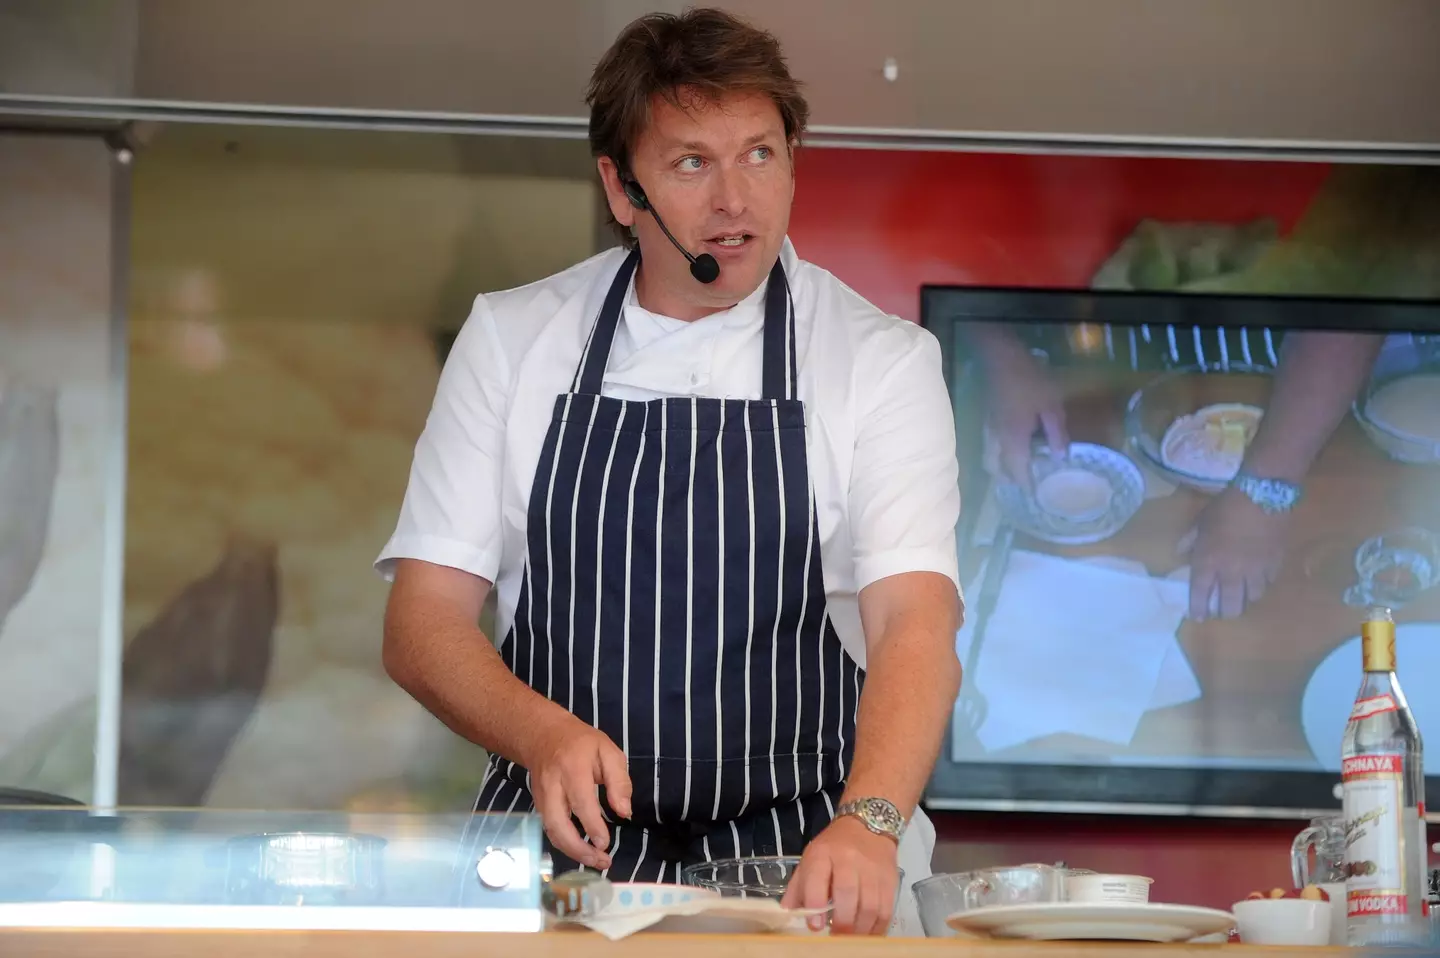 James Martin swore a whopping 42 times in his rant at TV crew.